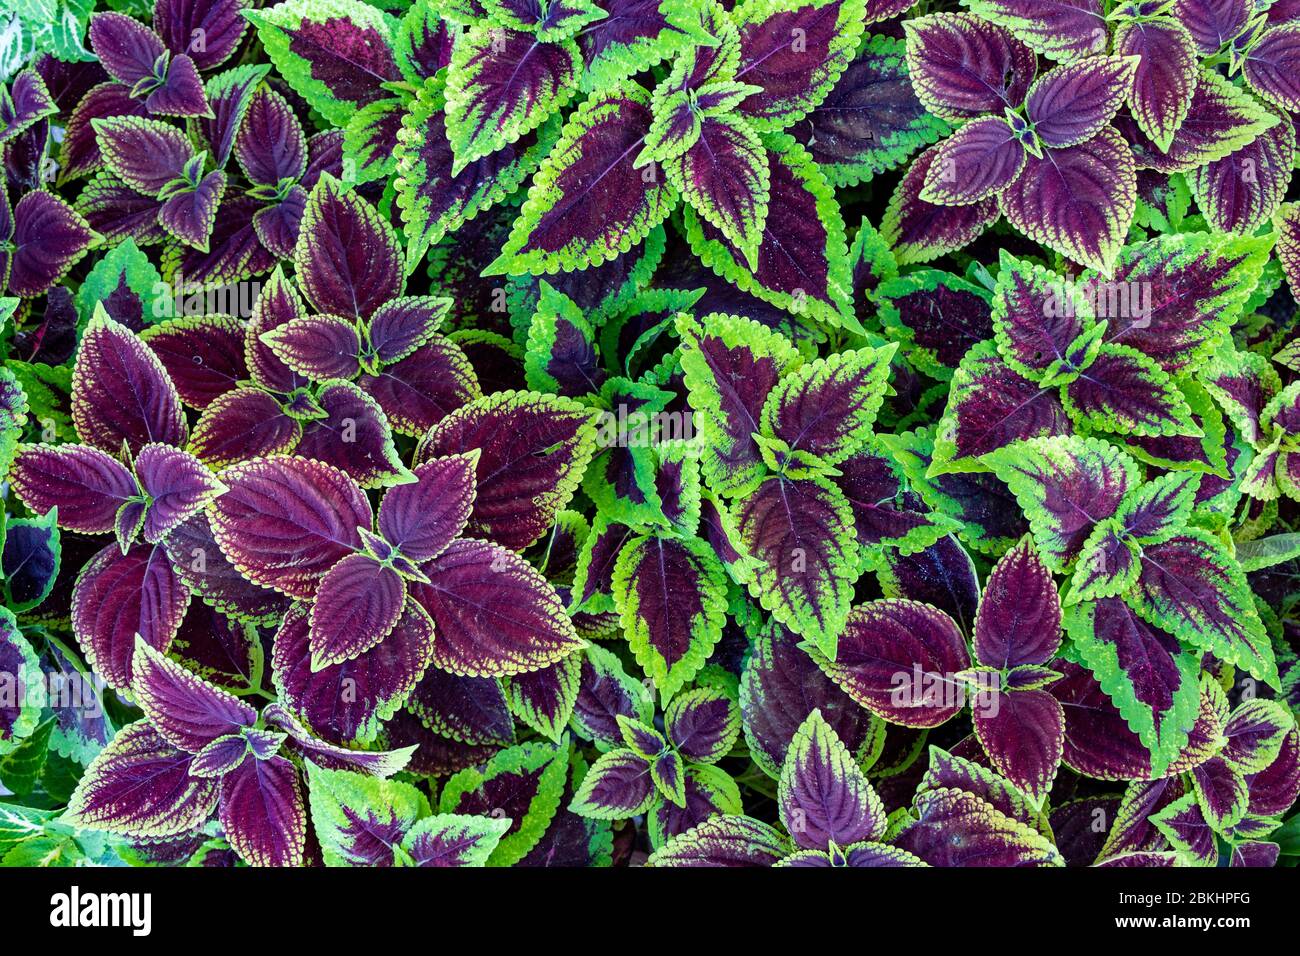 Green and purple leaves Coleus aka Painted Nettle. Vibrant, saturated background budding leaves shows soft texture and defined edges. Stock Photo